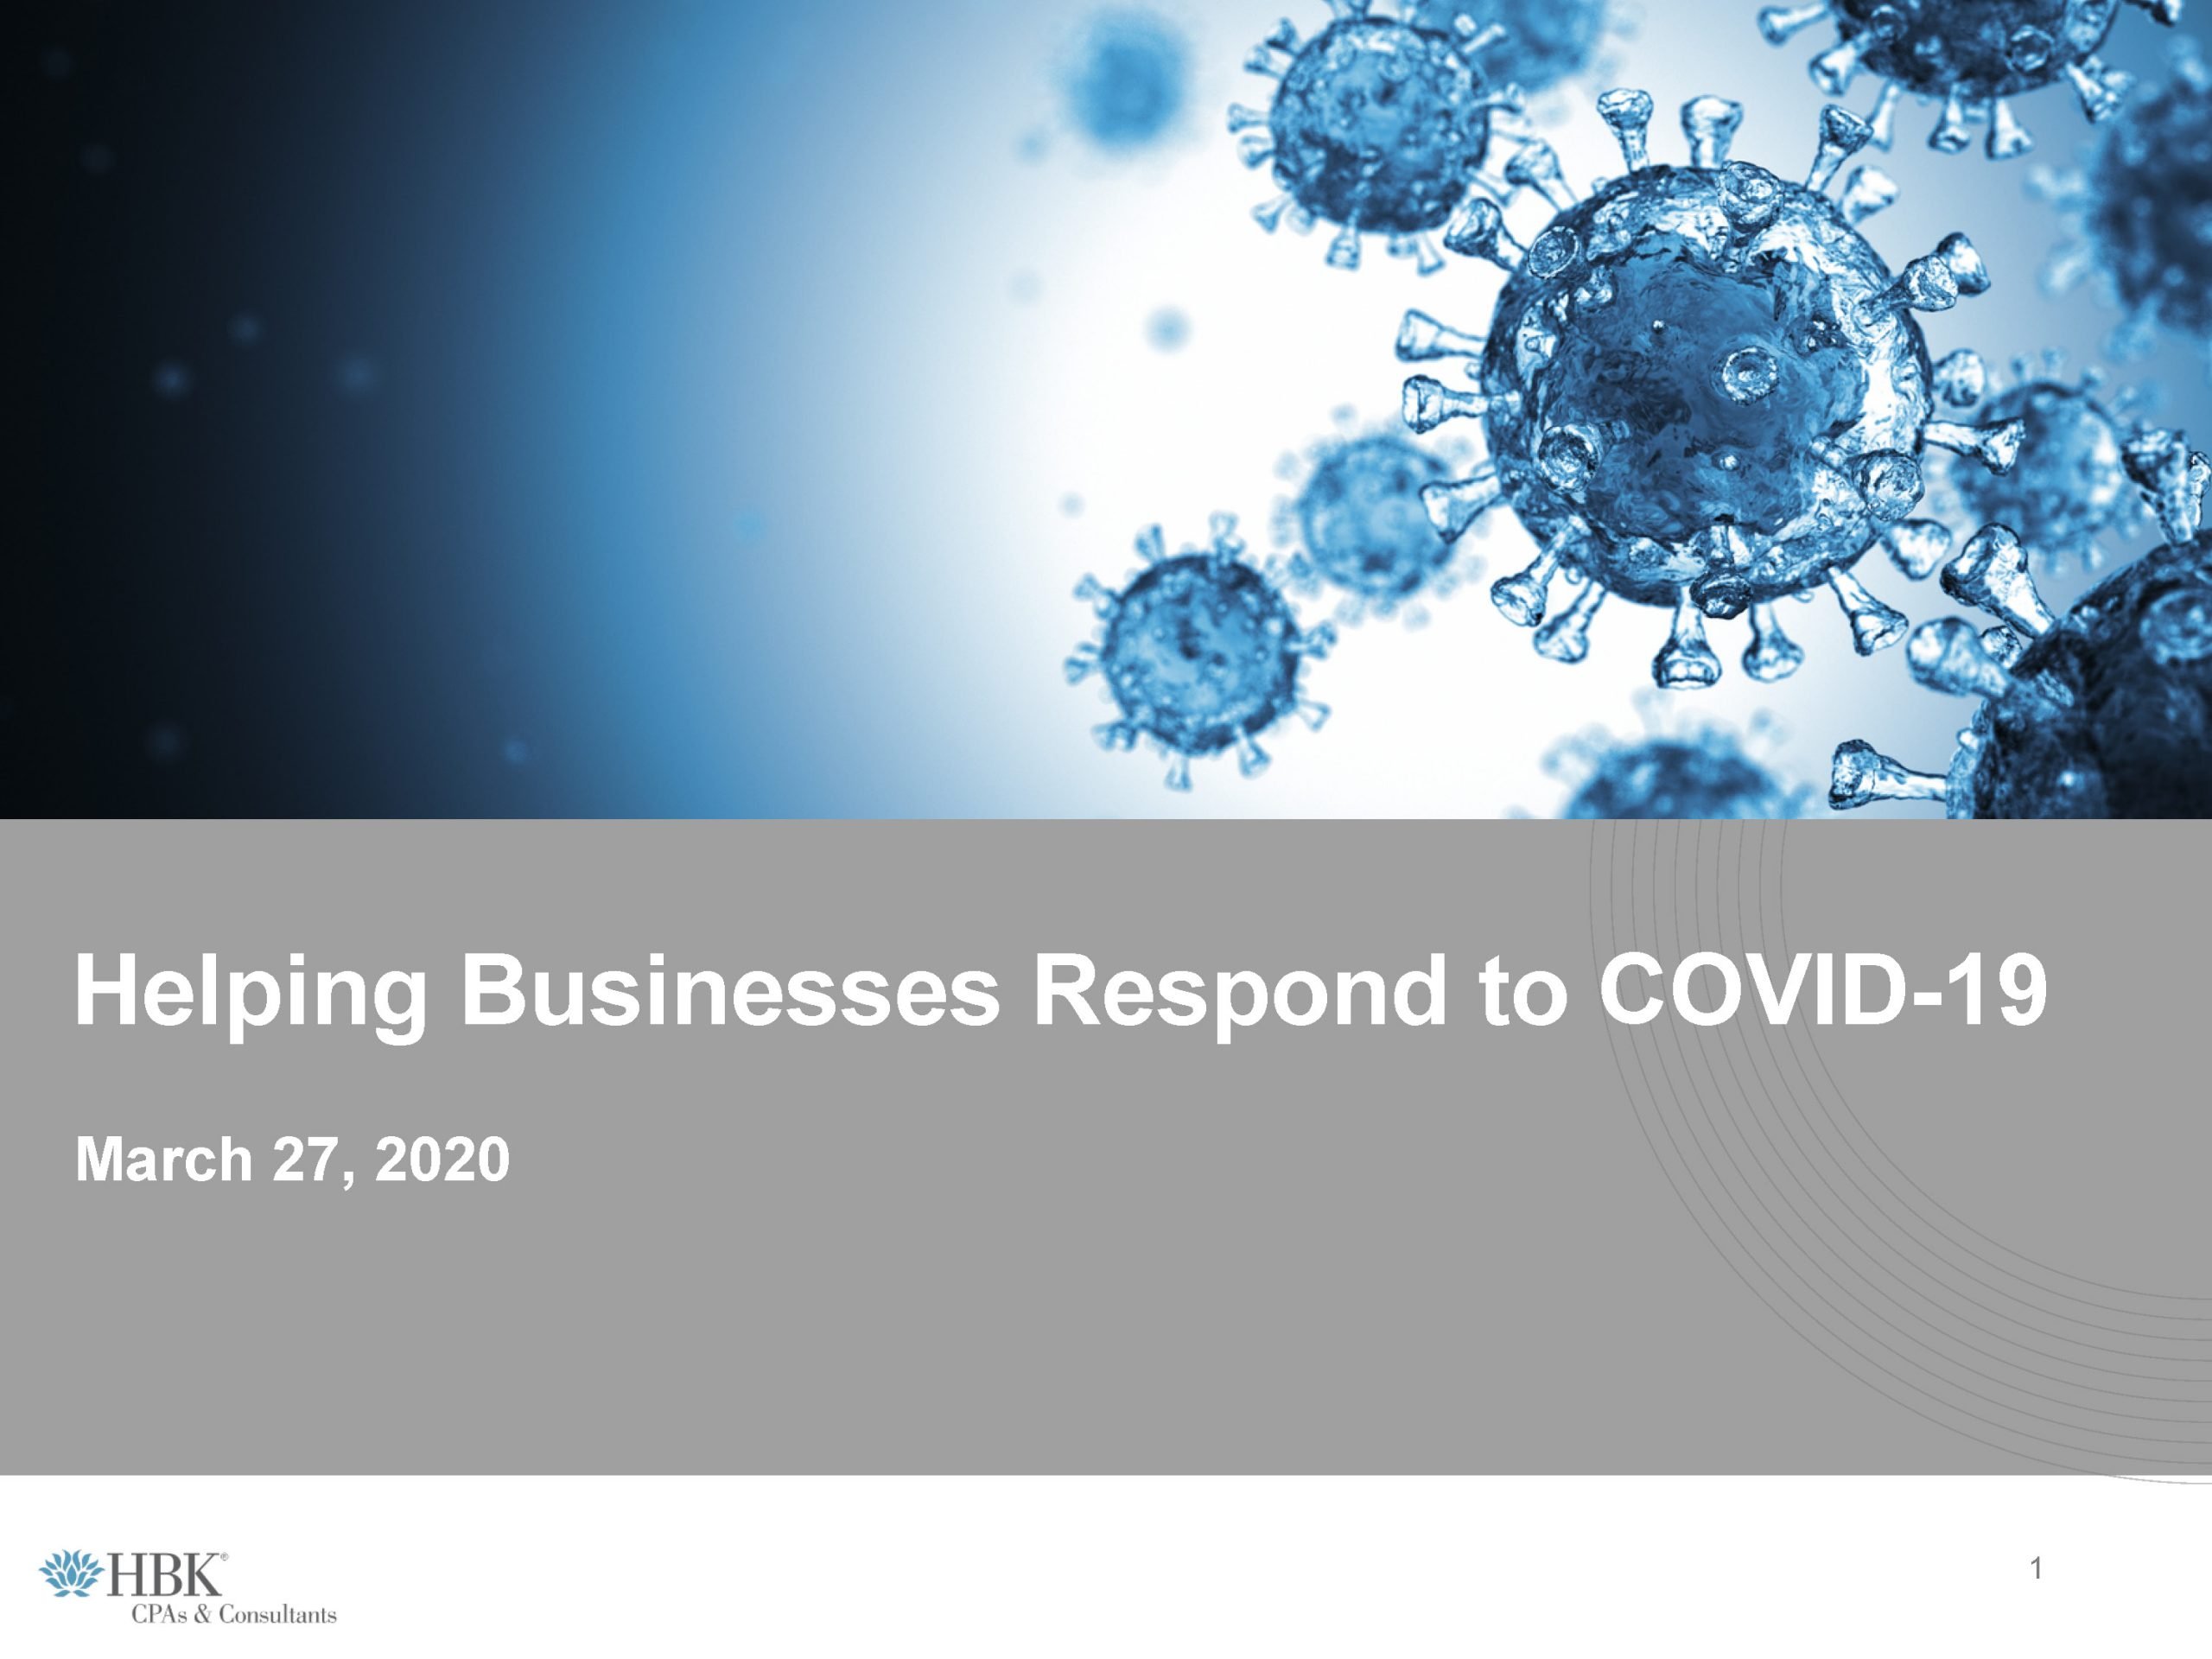 Watch: Helping Businesses Respond to COVID 19